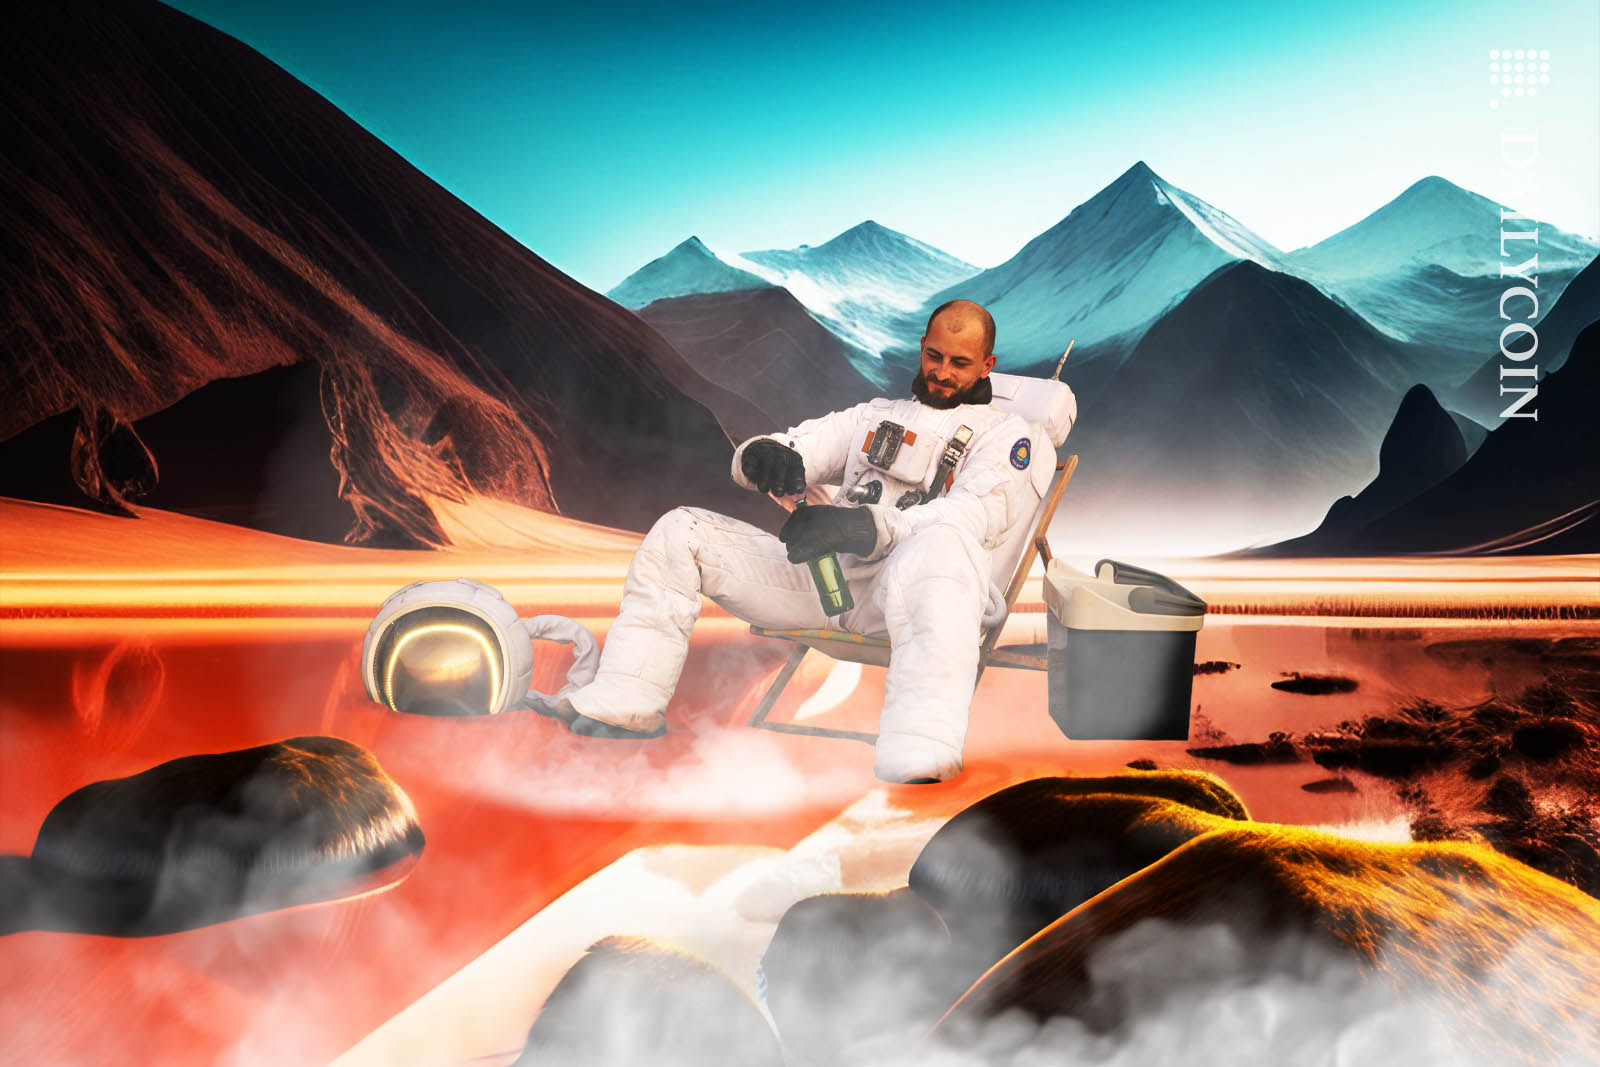 Astronaut relaxing at an alien swamp with red water surrounded by mountains.